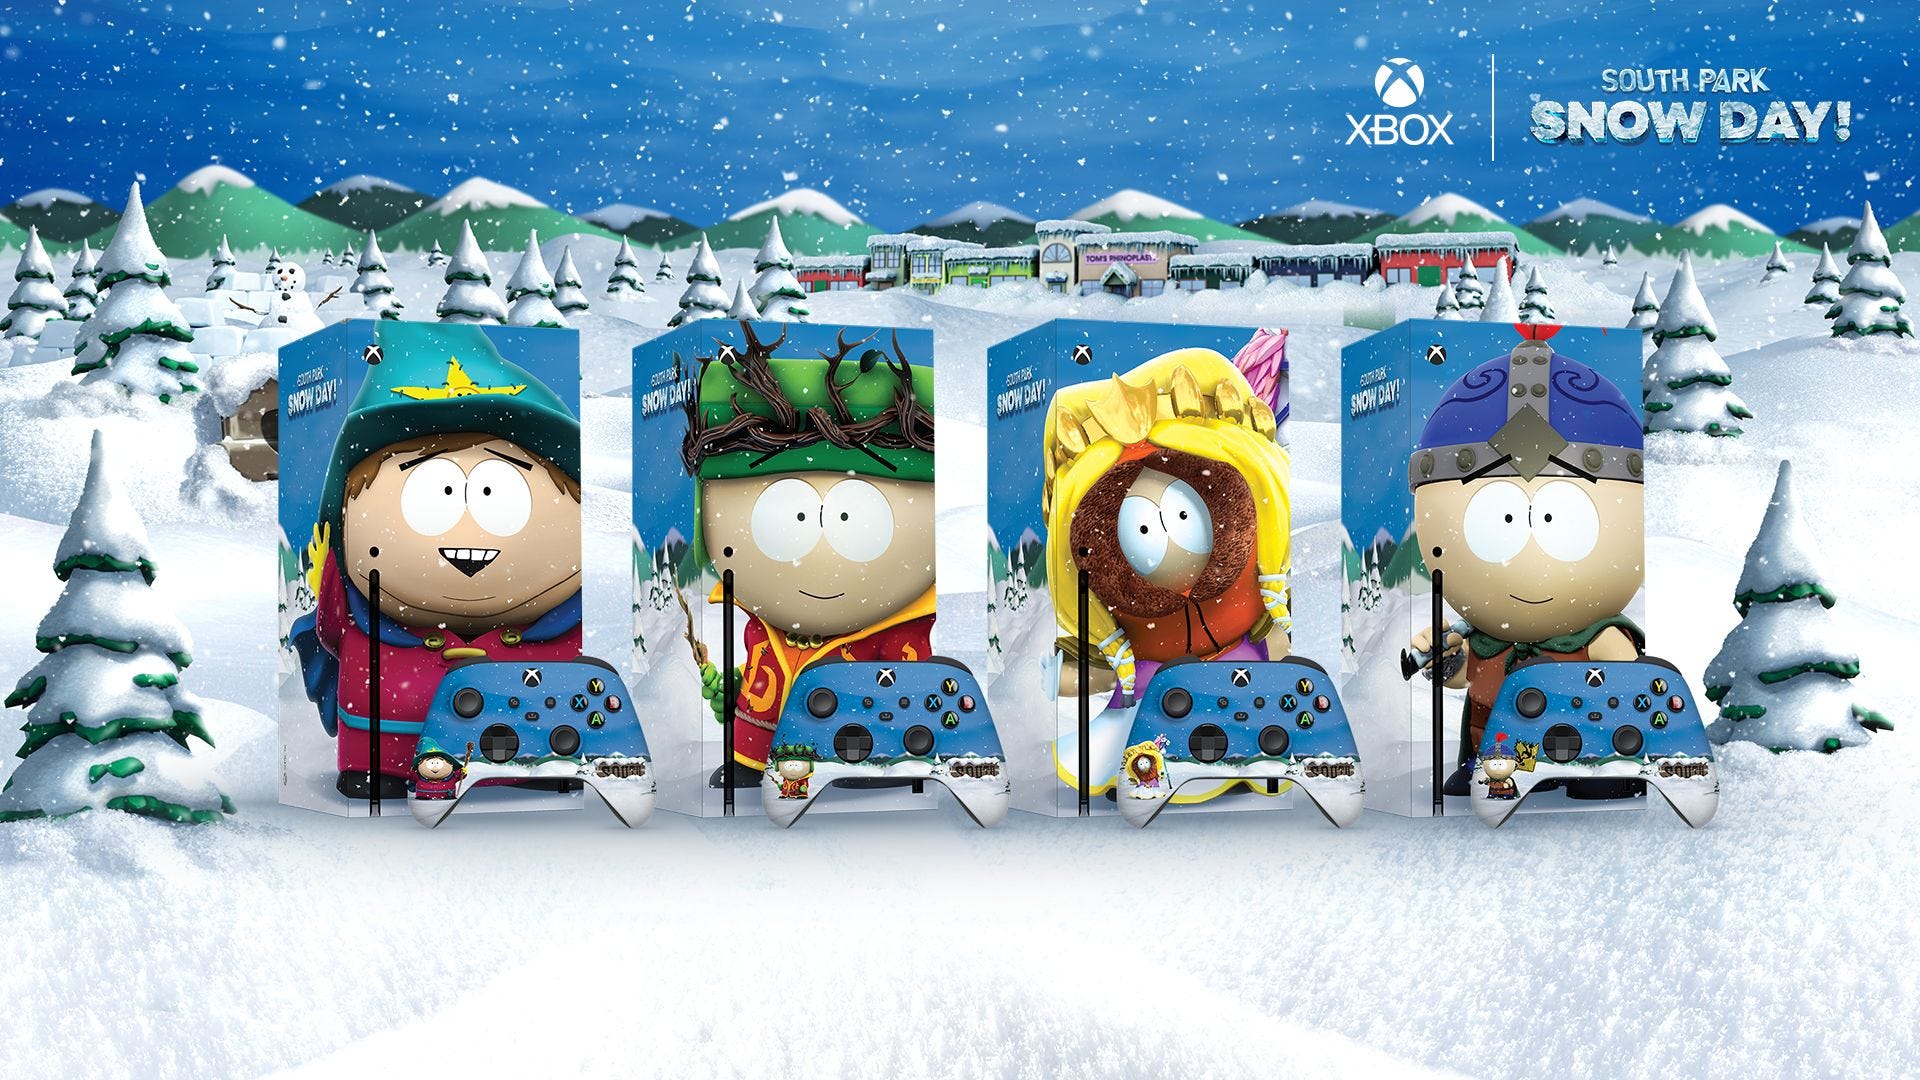 Xbox celebrates release of South Park: Snow Day by giving away four custom South Park-themed Series X consoles